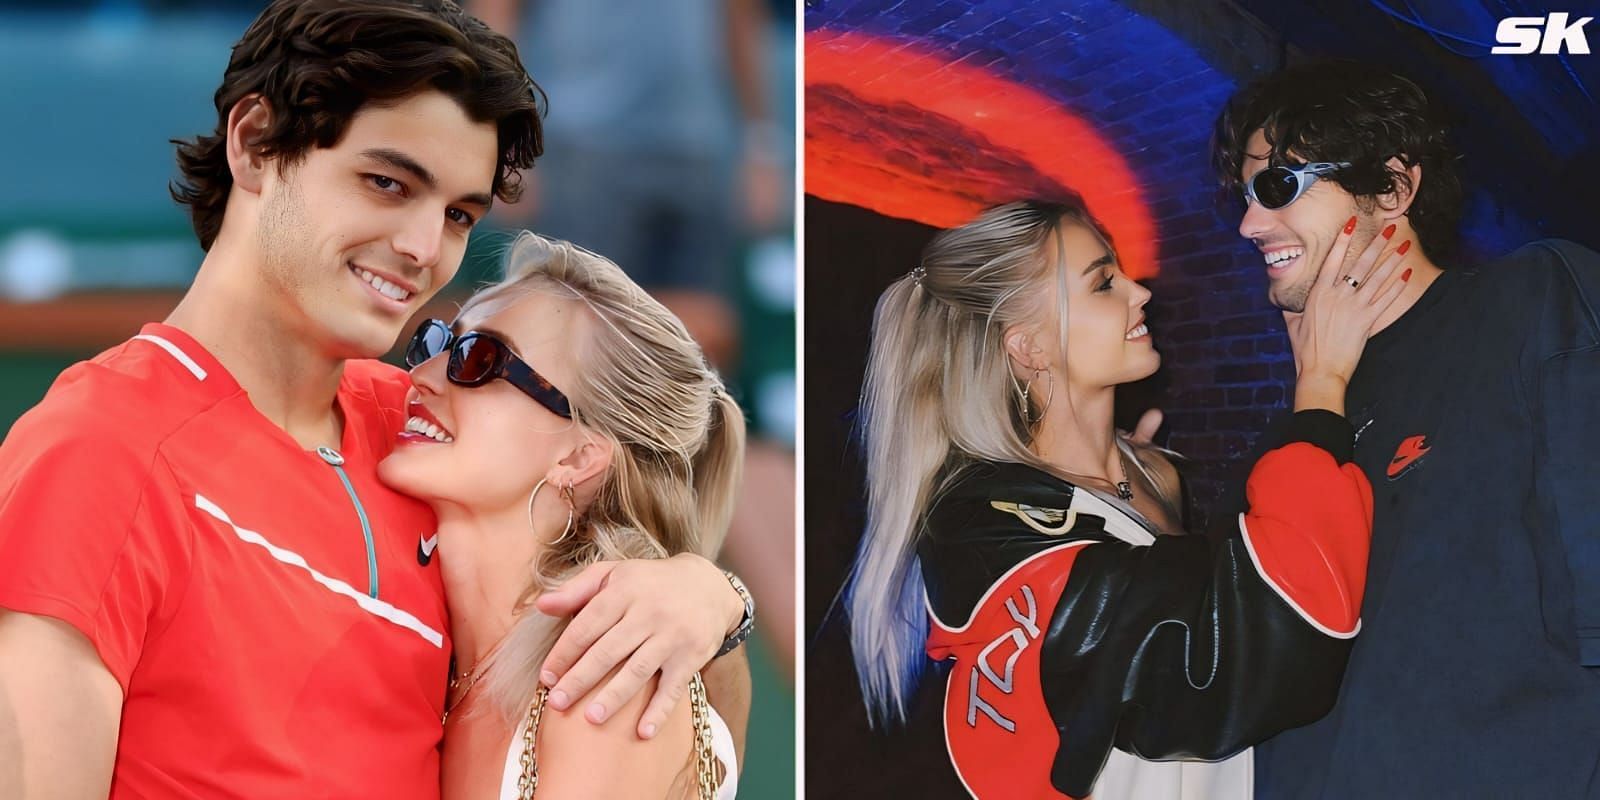 Taylor Fritz’s girlfriend Morgan Riddle cheers him on during Italian Open R3 win over compatriot Sebastian Korda days after reunion